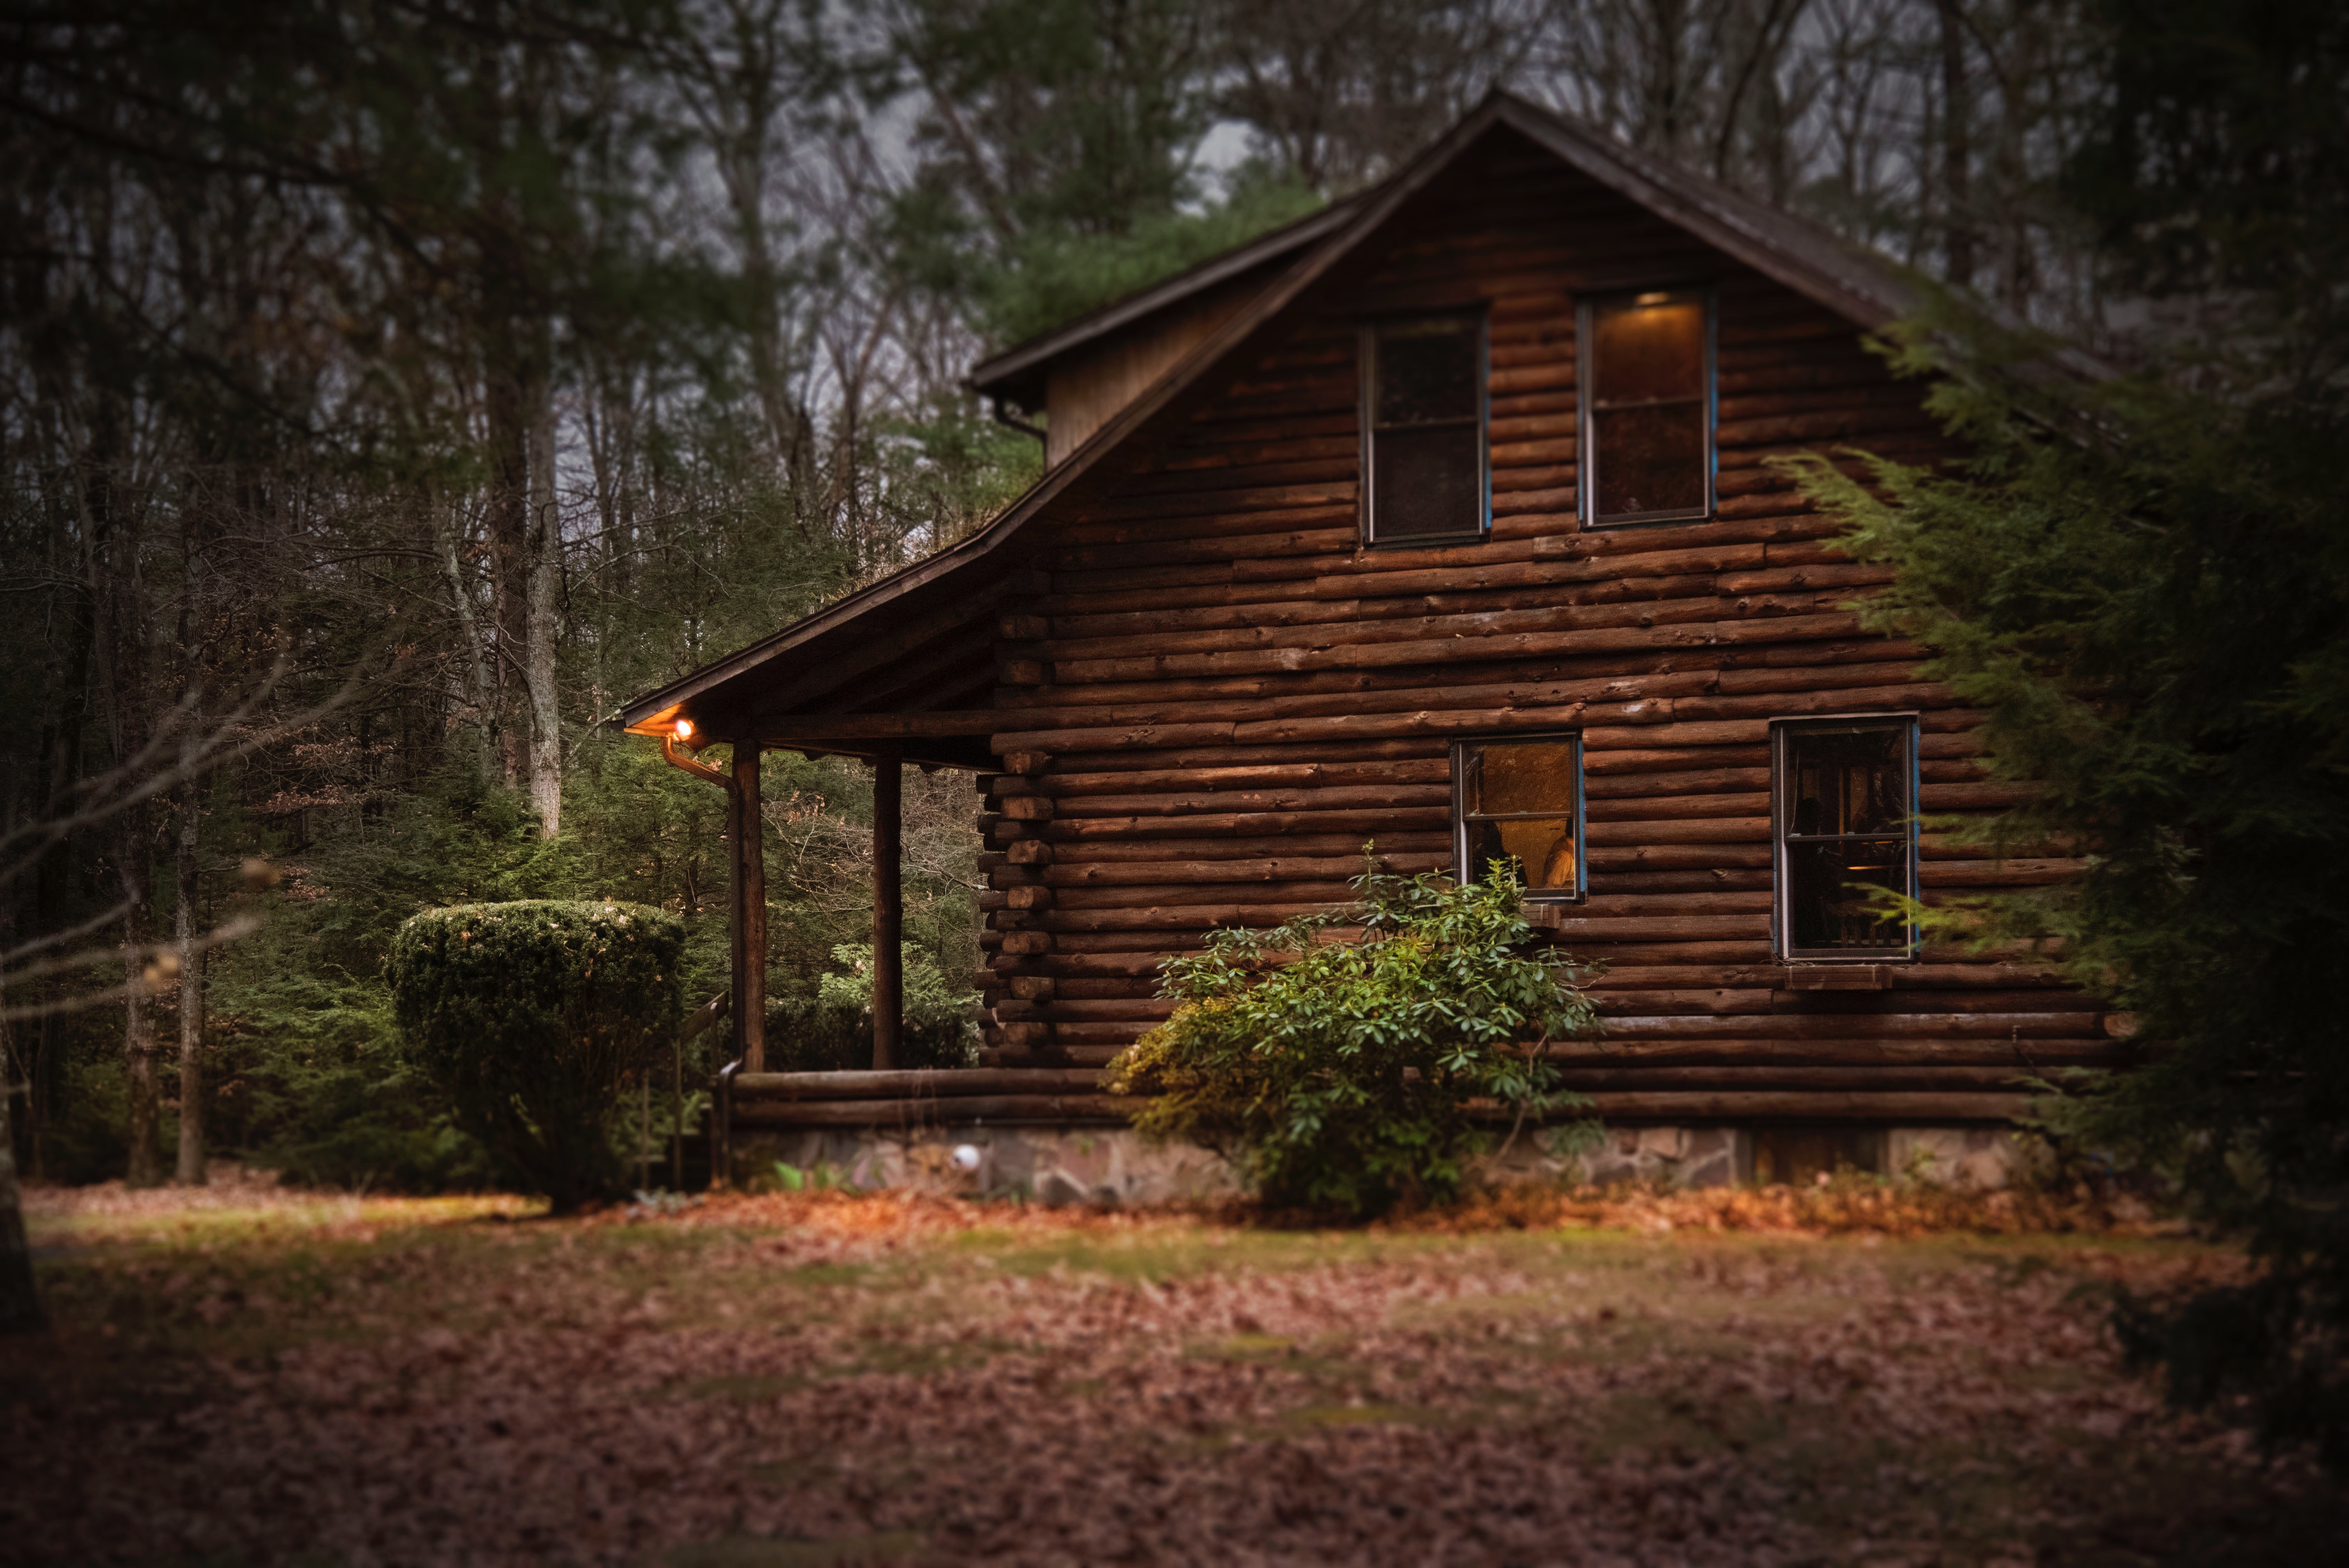 Brown Cabin in the Woods on Daytime, Architecture, Light, Woods, Wooden, HQ Photo